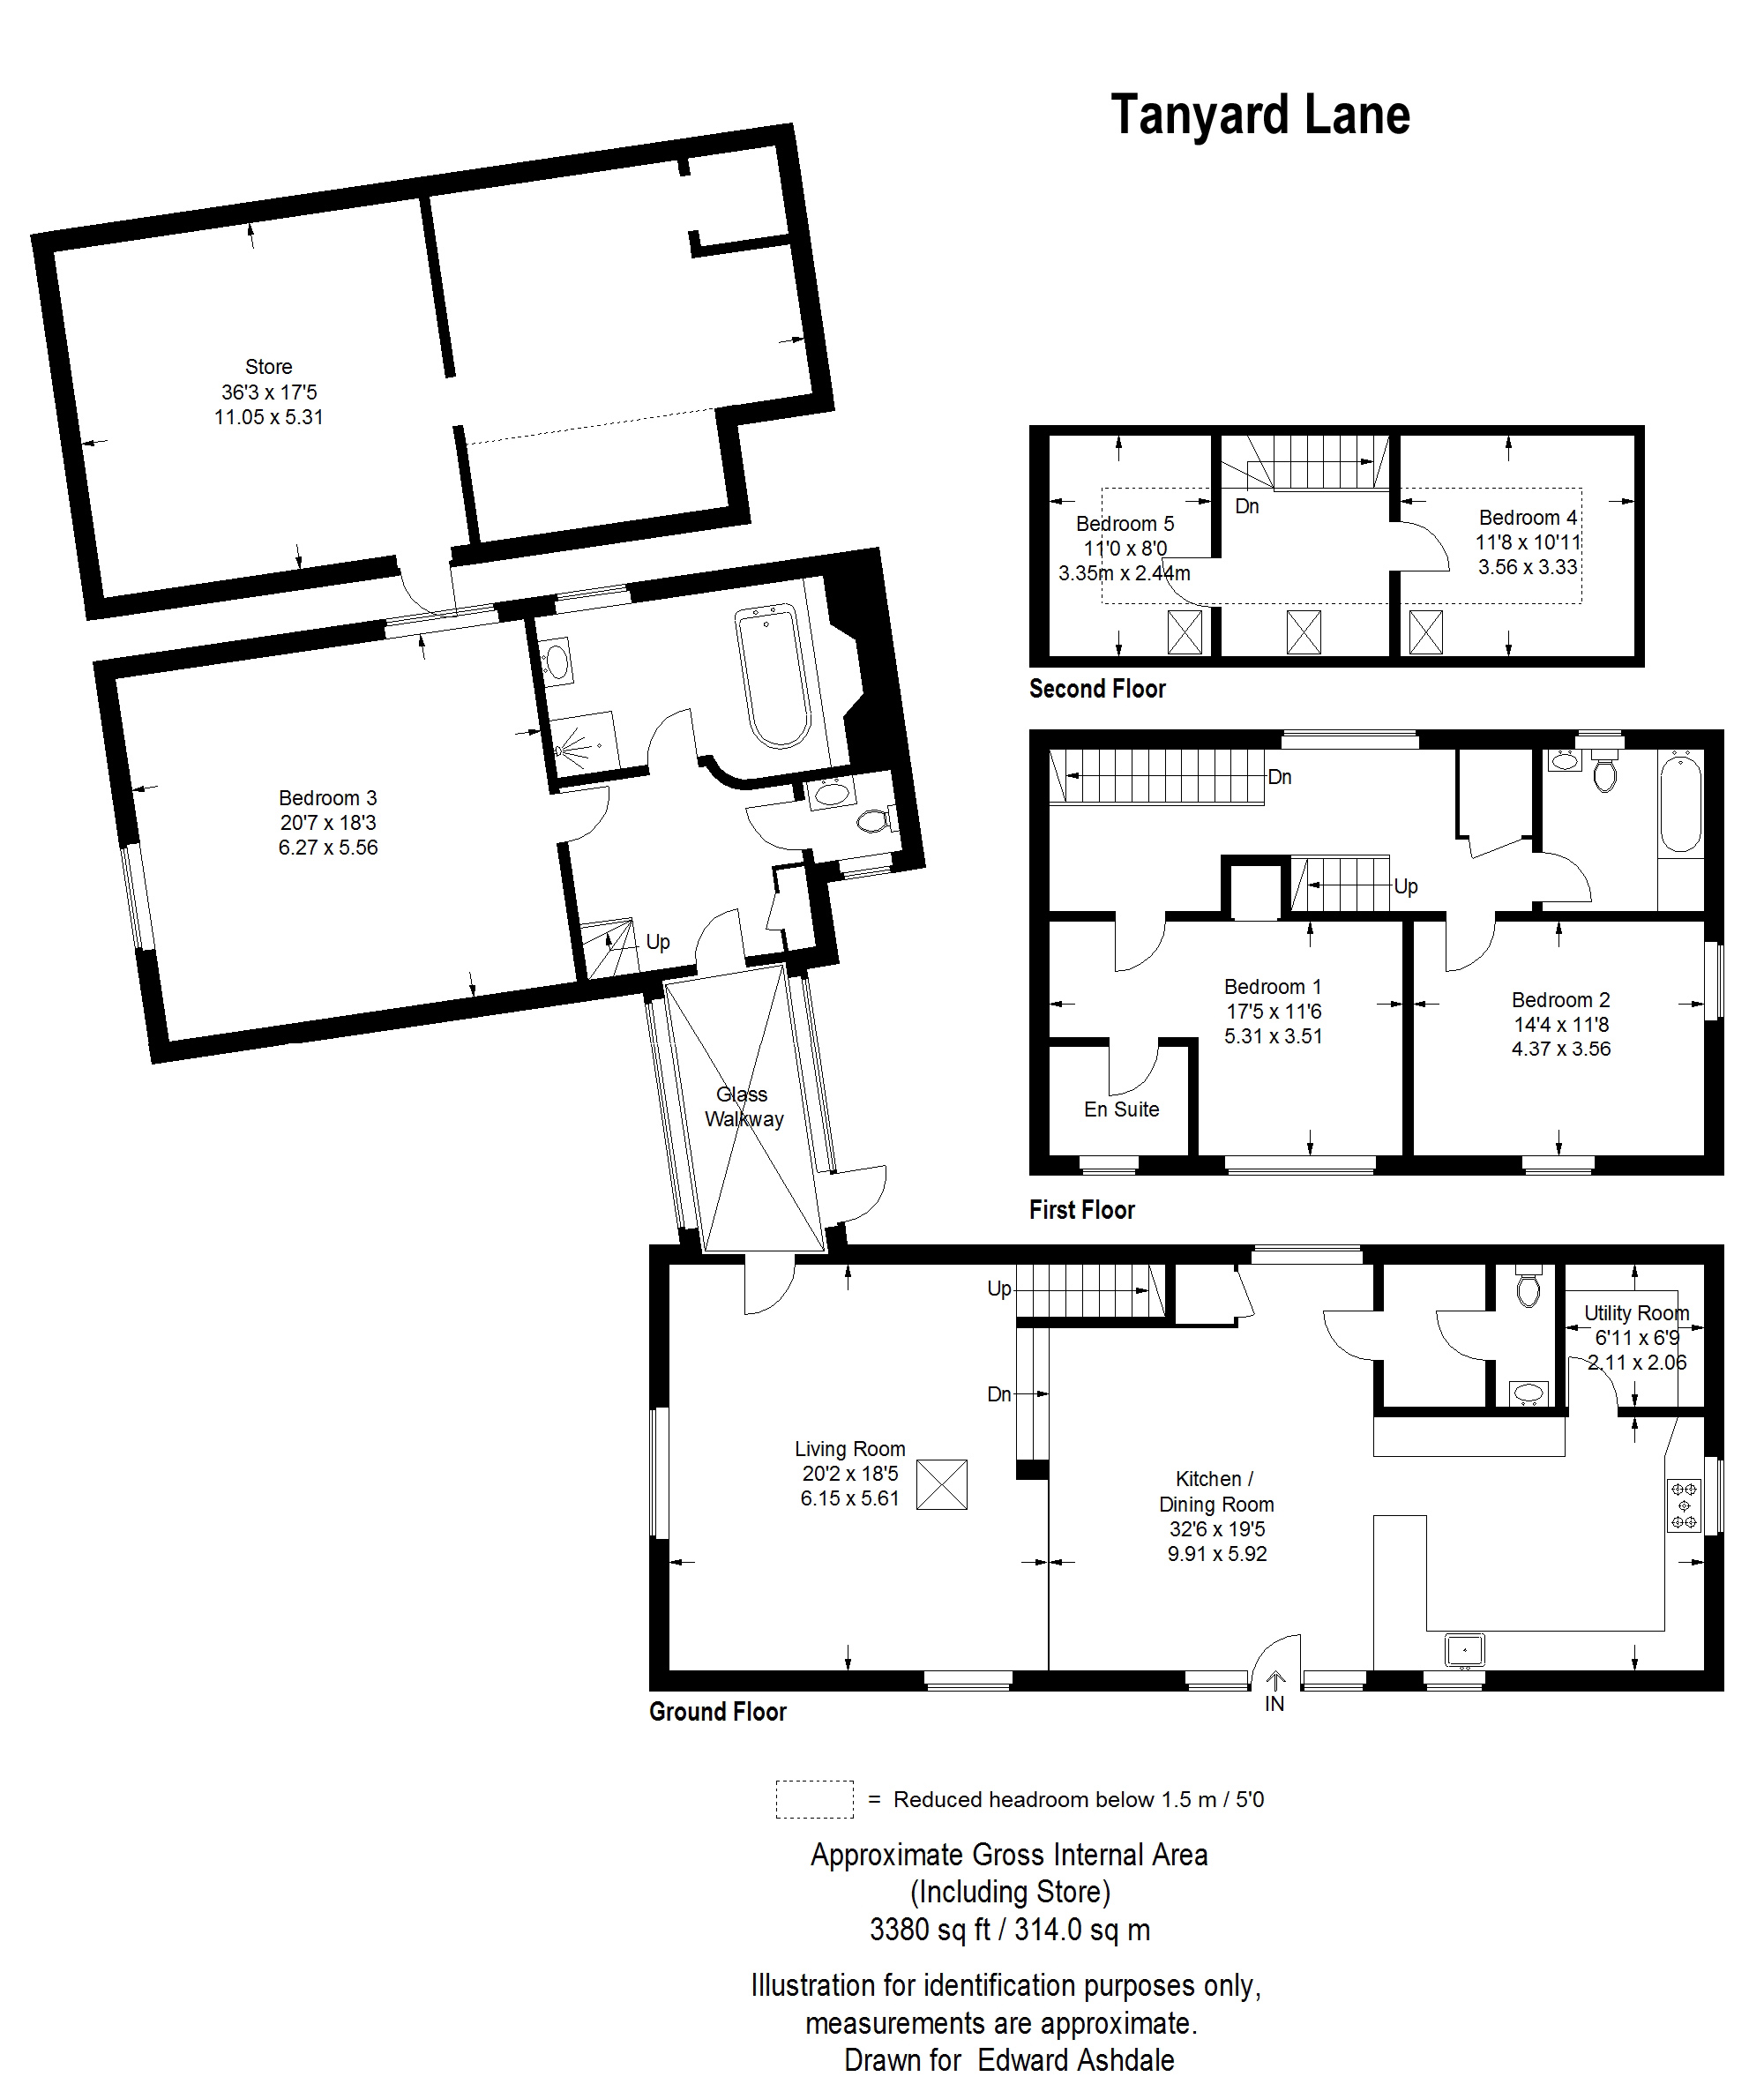 5 bed barn conversion for sale - Property floorplan